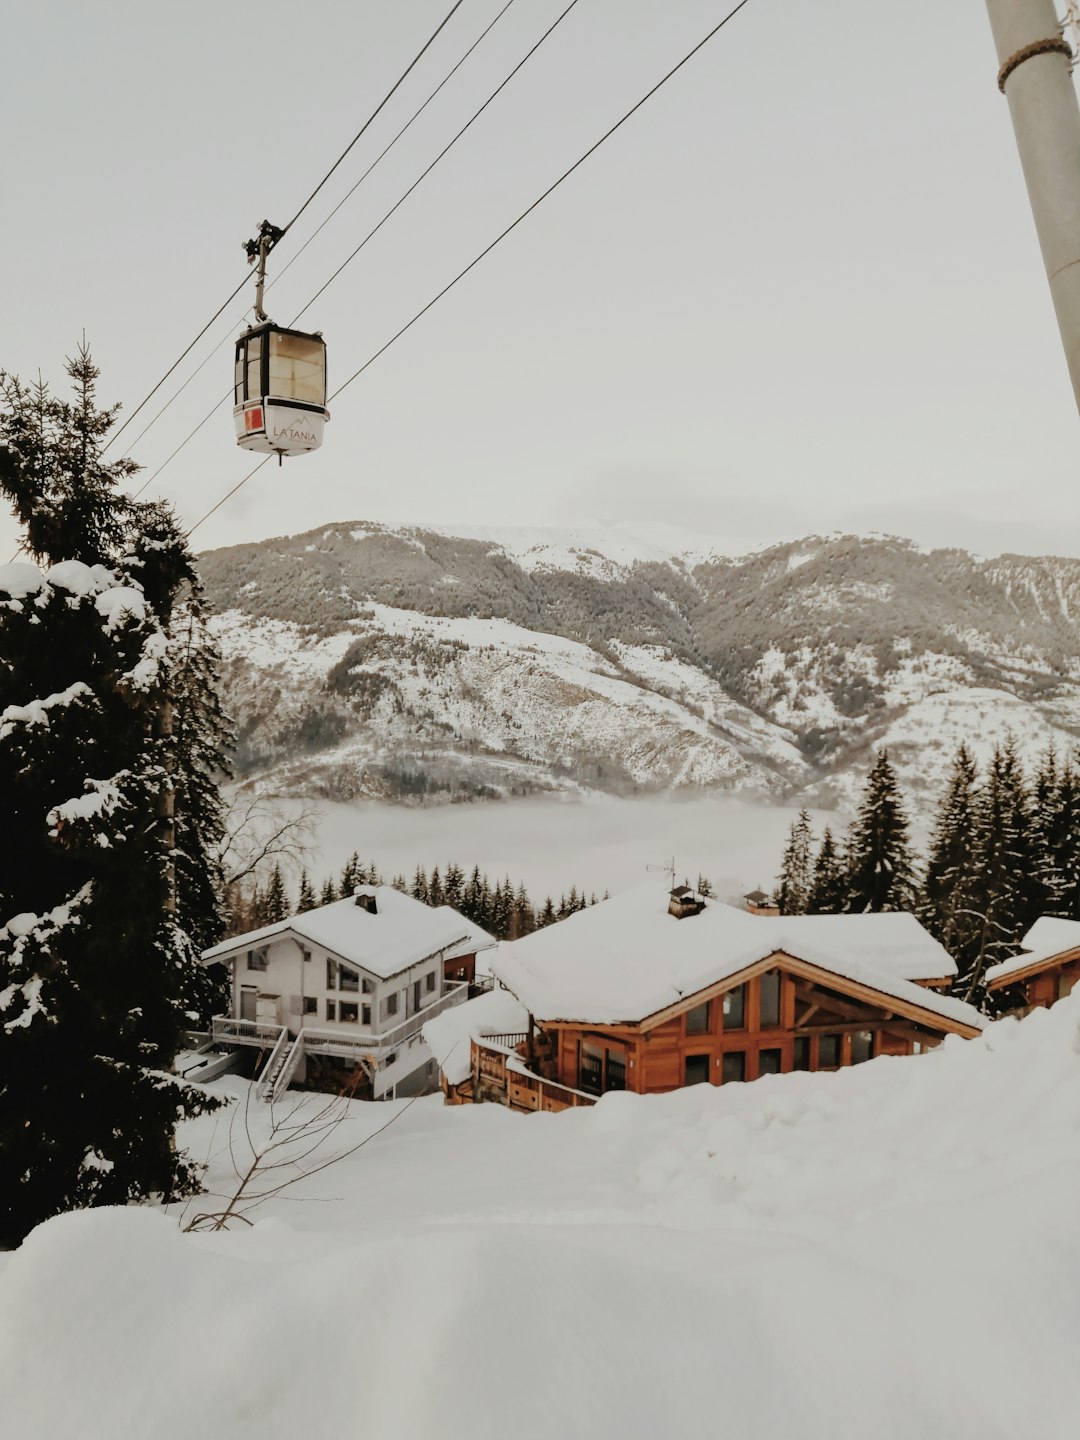 Travel Tips and Stories of La Tania in France